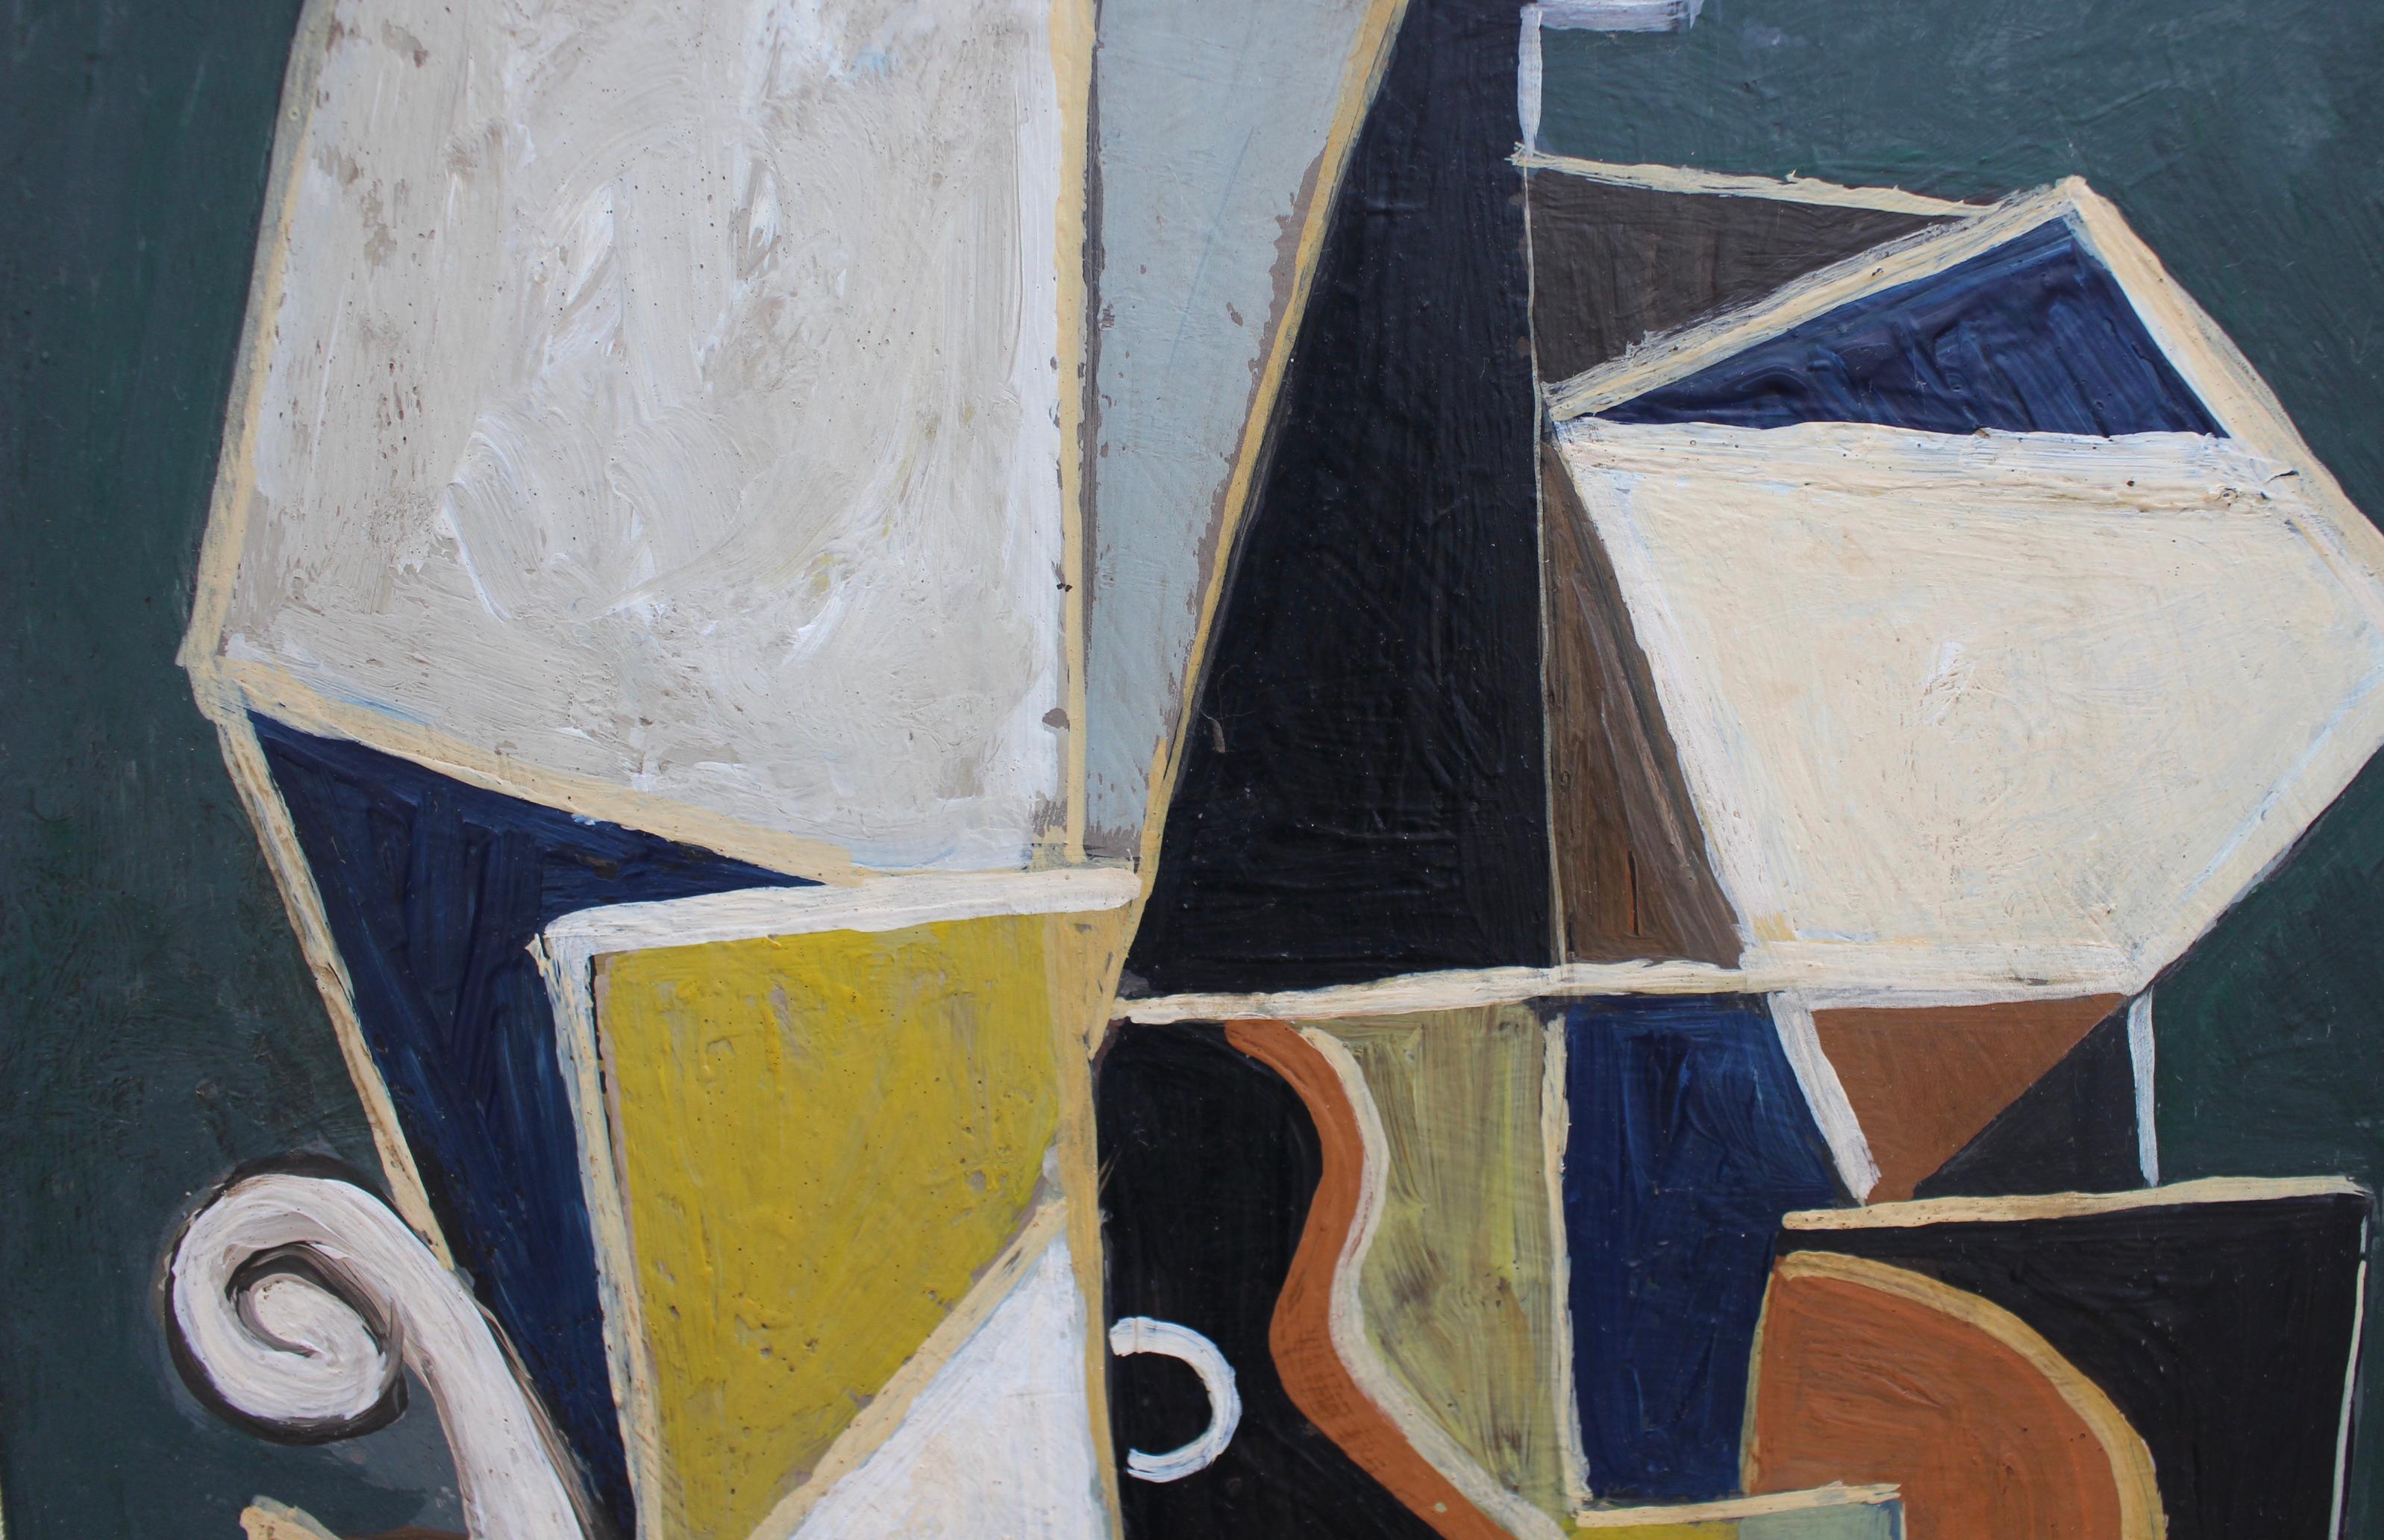 'Cubist Still Life with Guitar', oil on board (circa 1970s), Berlin School. This artwork is a clear cubist homage to one of the founders of the movement, Juan Gris (1887- 1927). Cubism started with Braque (1882-1963) and Picasso (1891-1973) in the